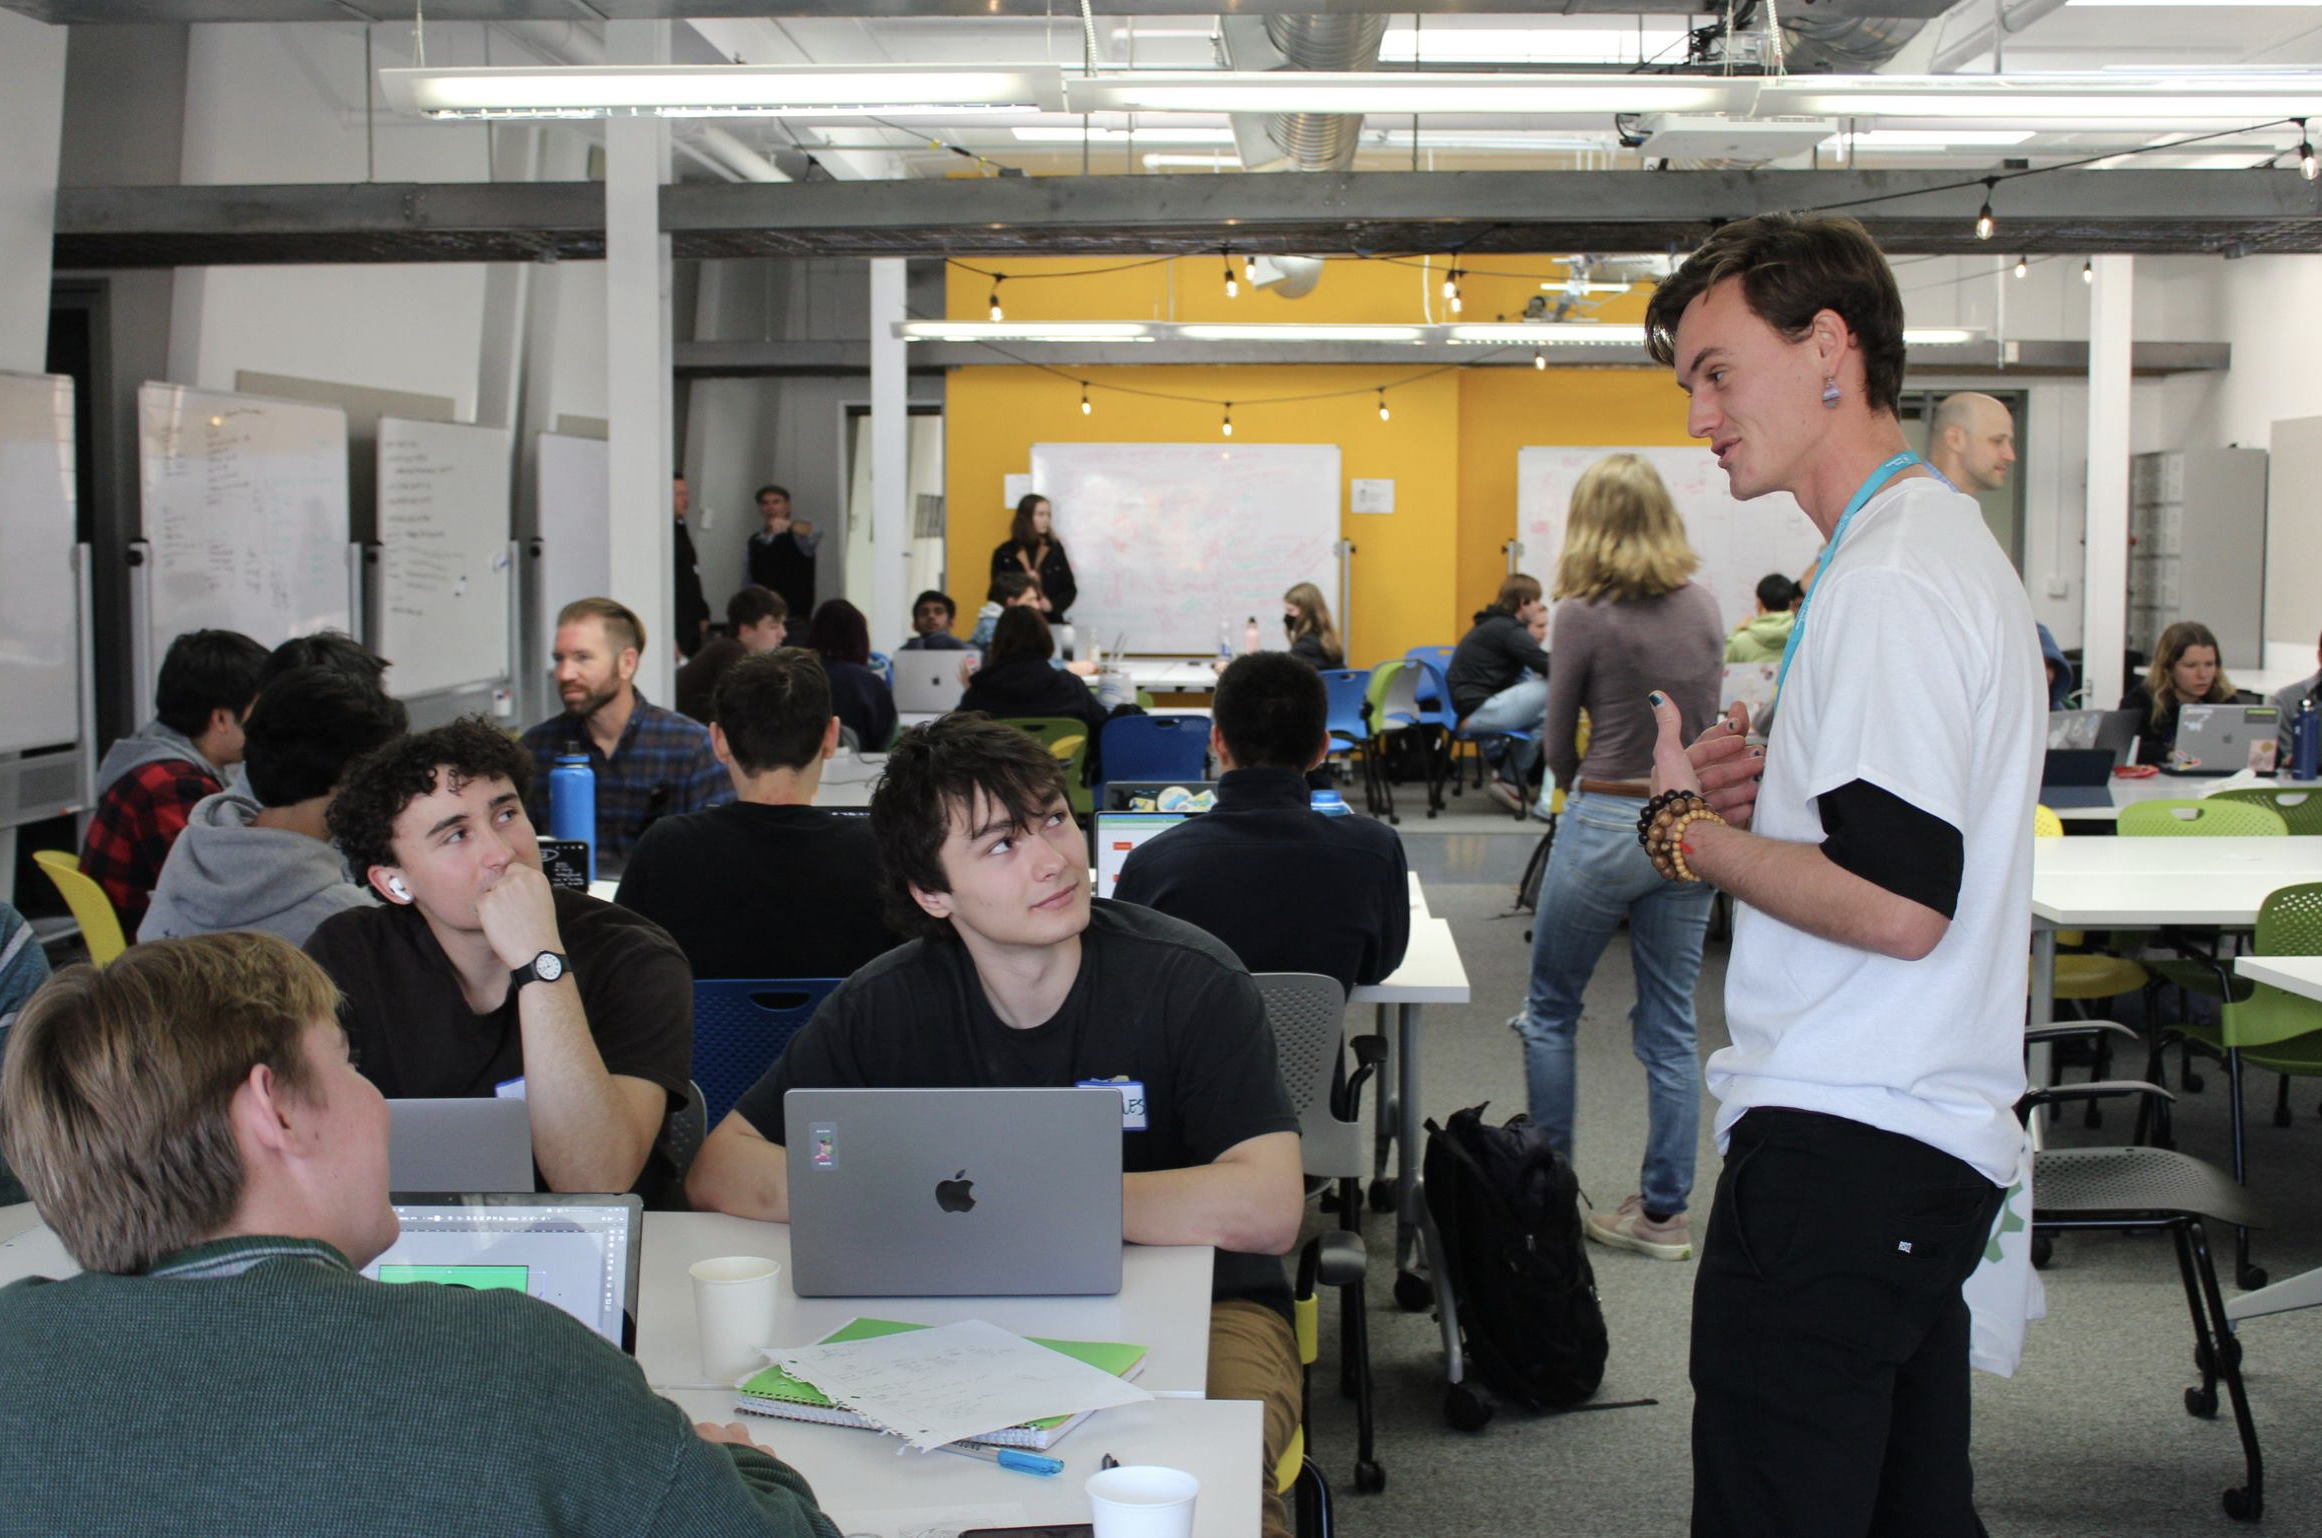 A group of students brainstorm in the CIE HotHouse. One is standing and talking to three other students, seated at a rectangular table with laptops in front of them.